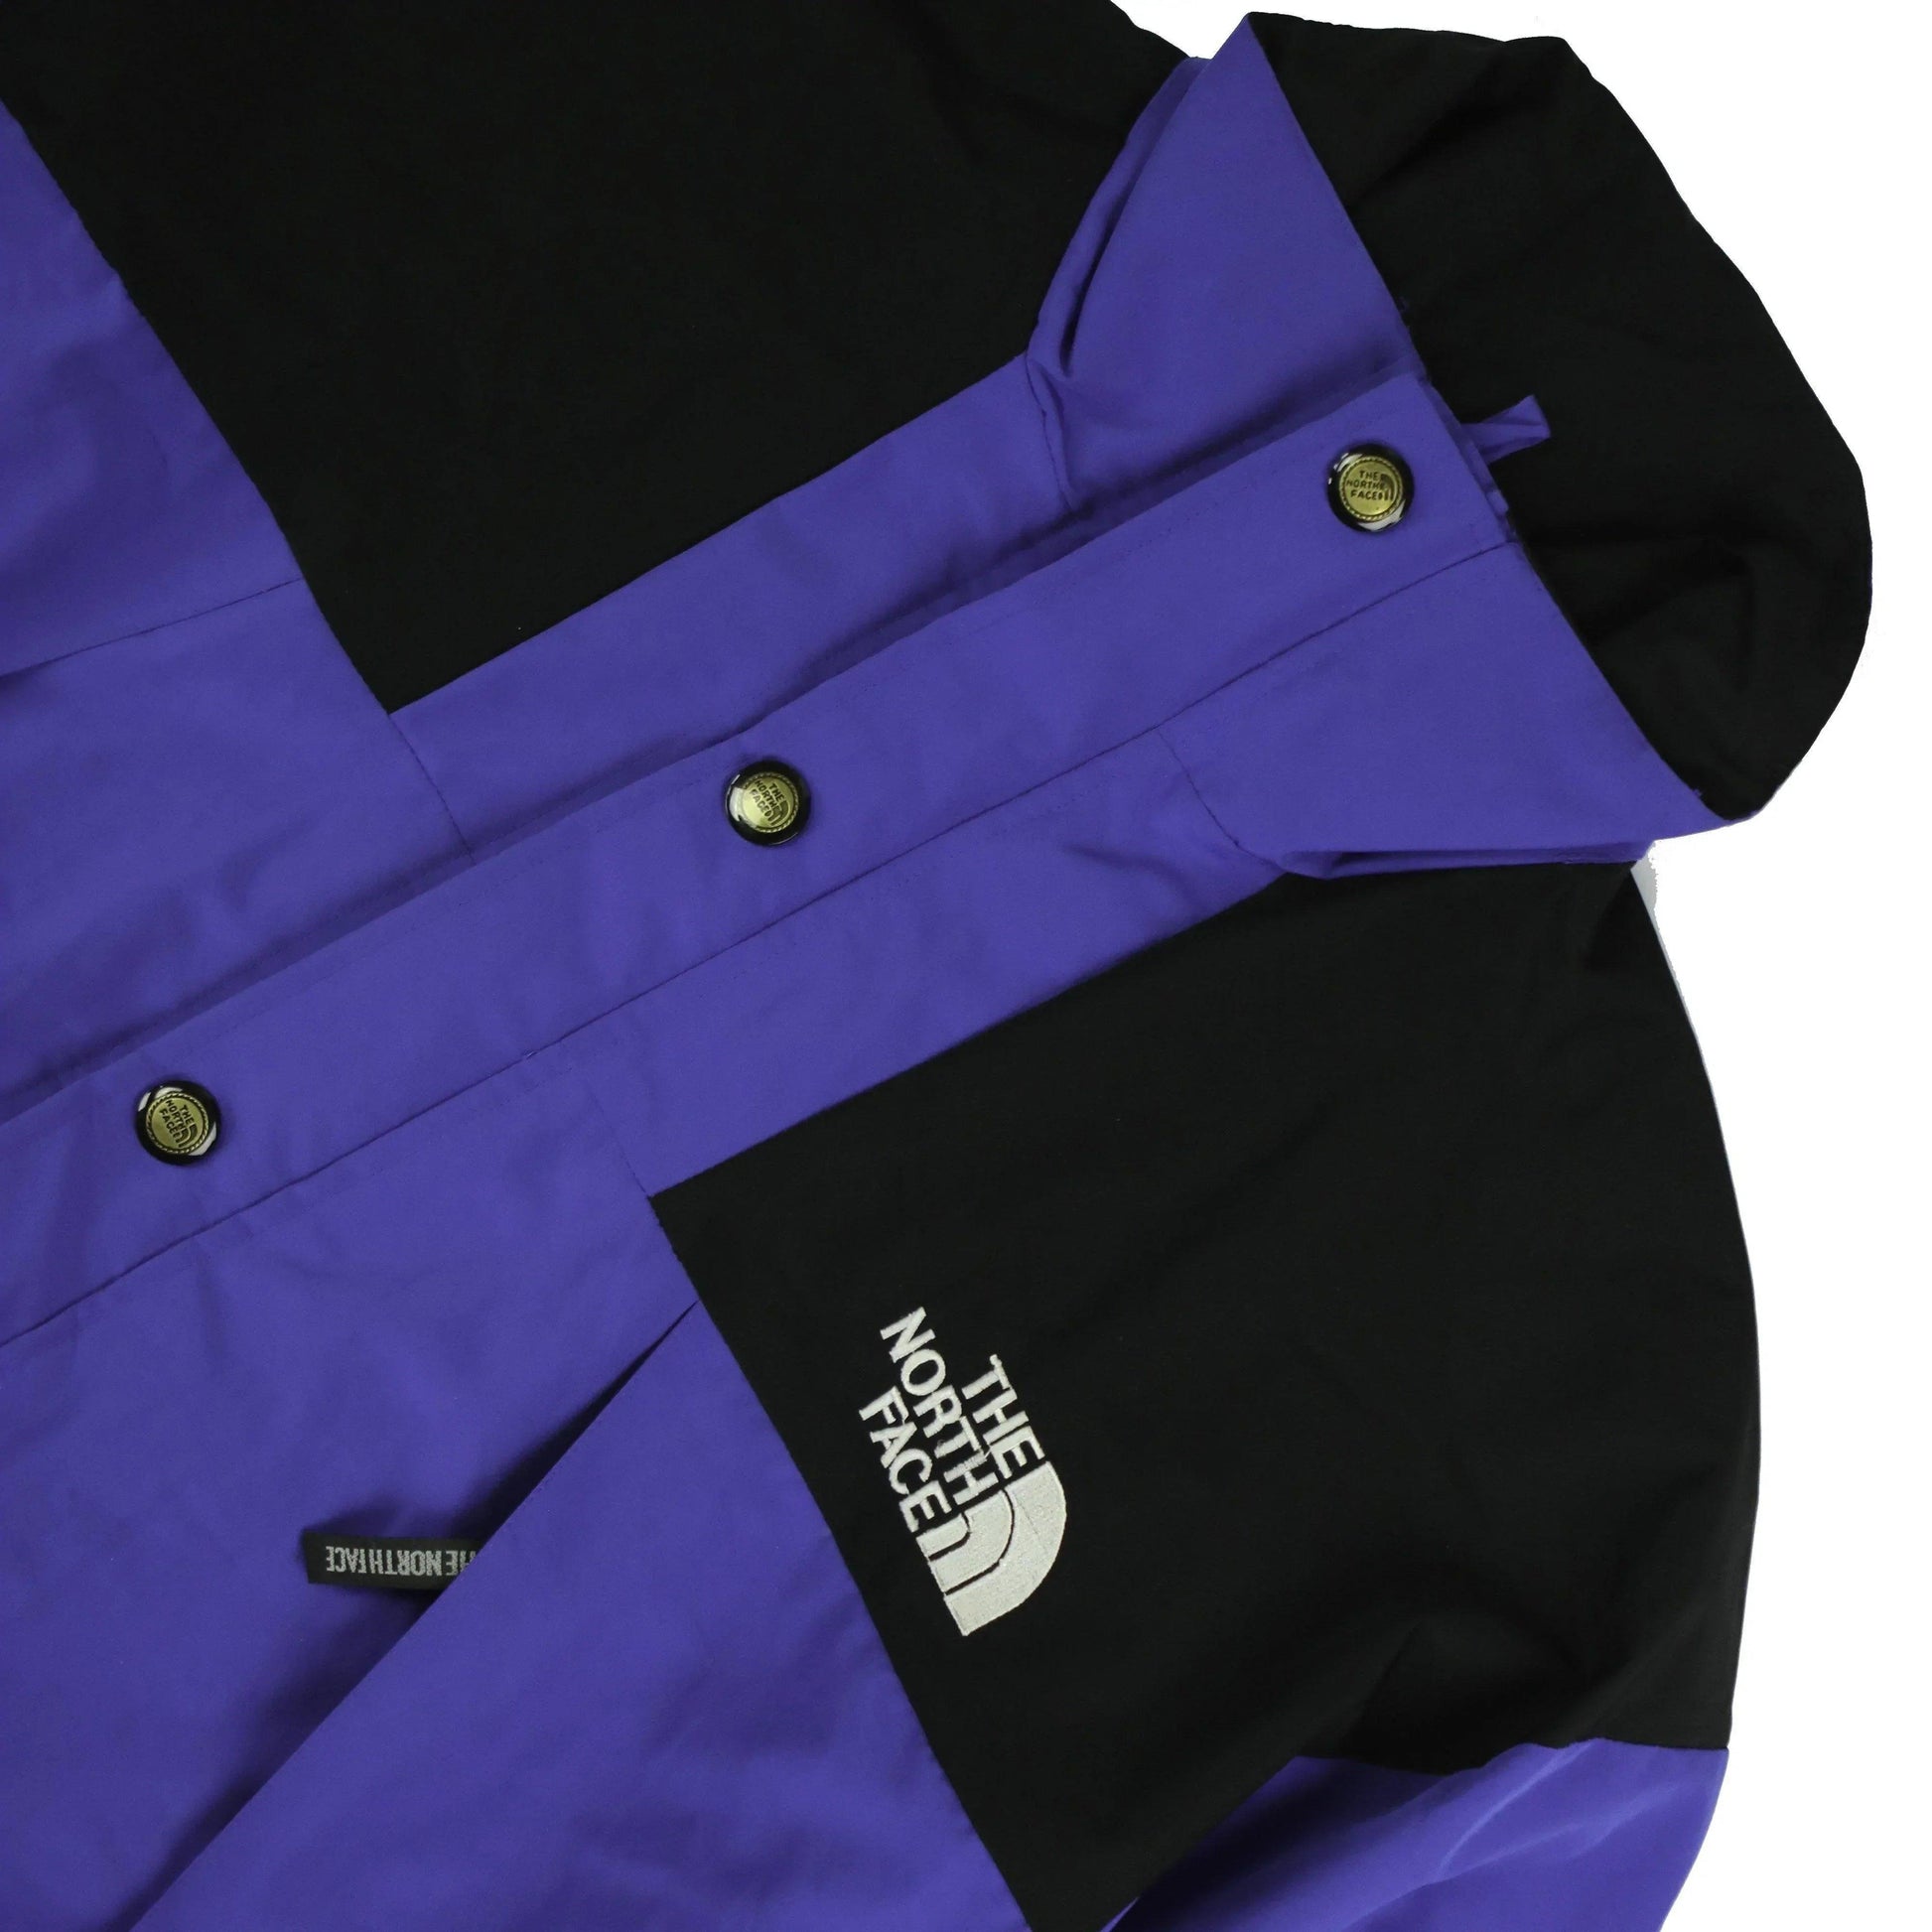 THE NORTH FACE GORTEX JACKET (L) - Known Source